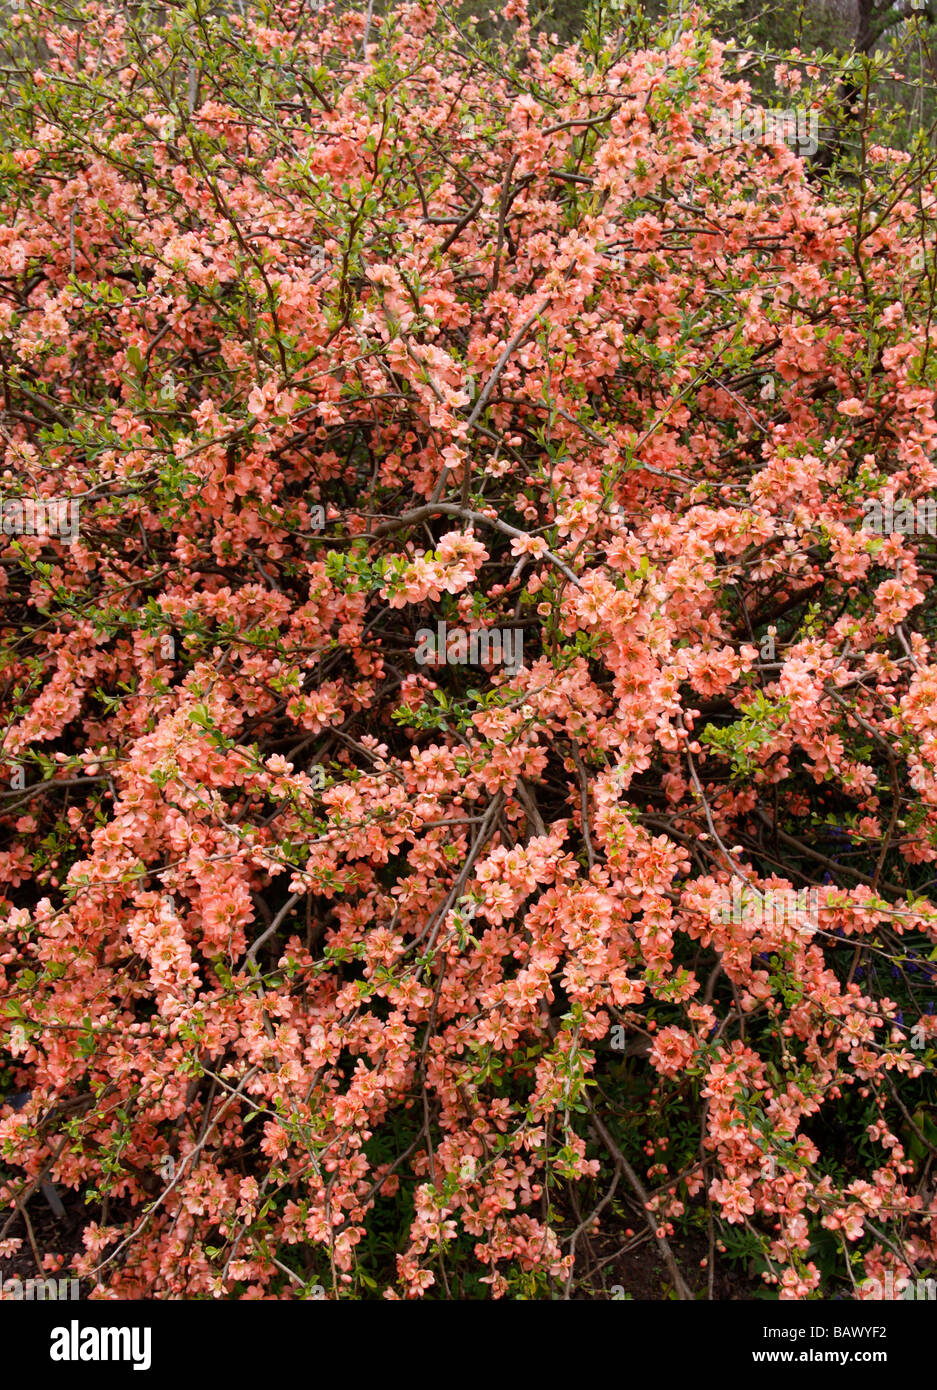 CHAENOMELES SUPERBA CORAL SEA. AKA - FLOWERING QUINCE, JAPANESE QUINCE, JAPONICA. Stock Photo